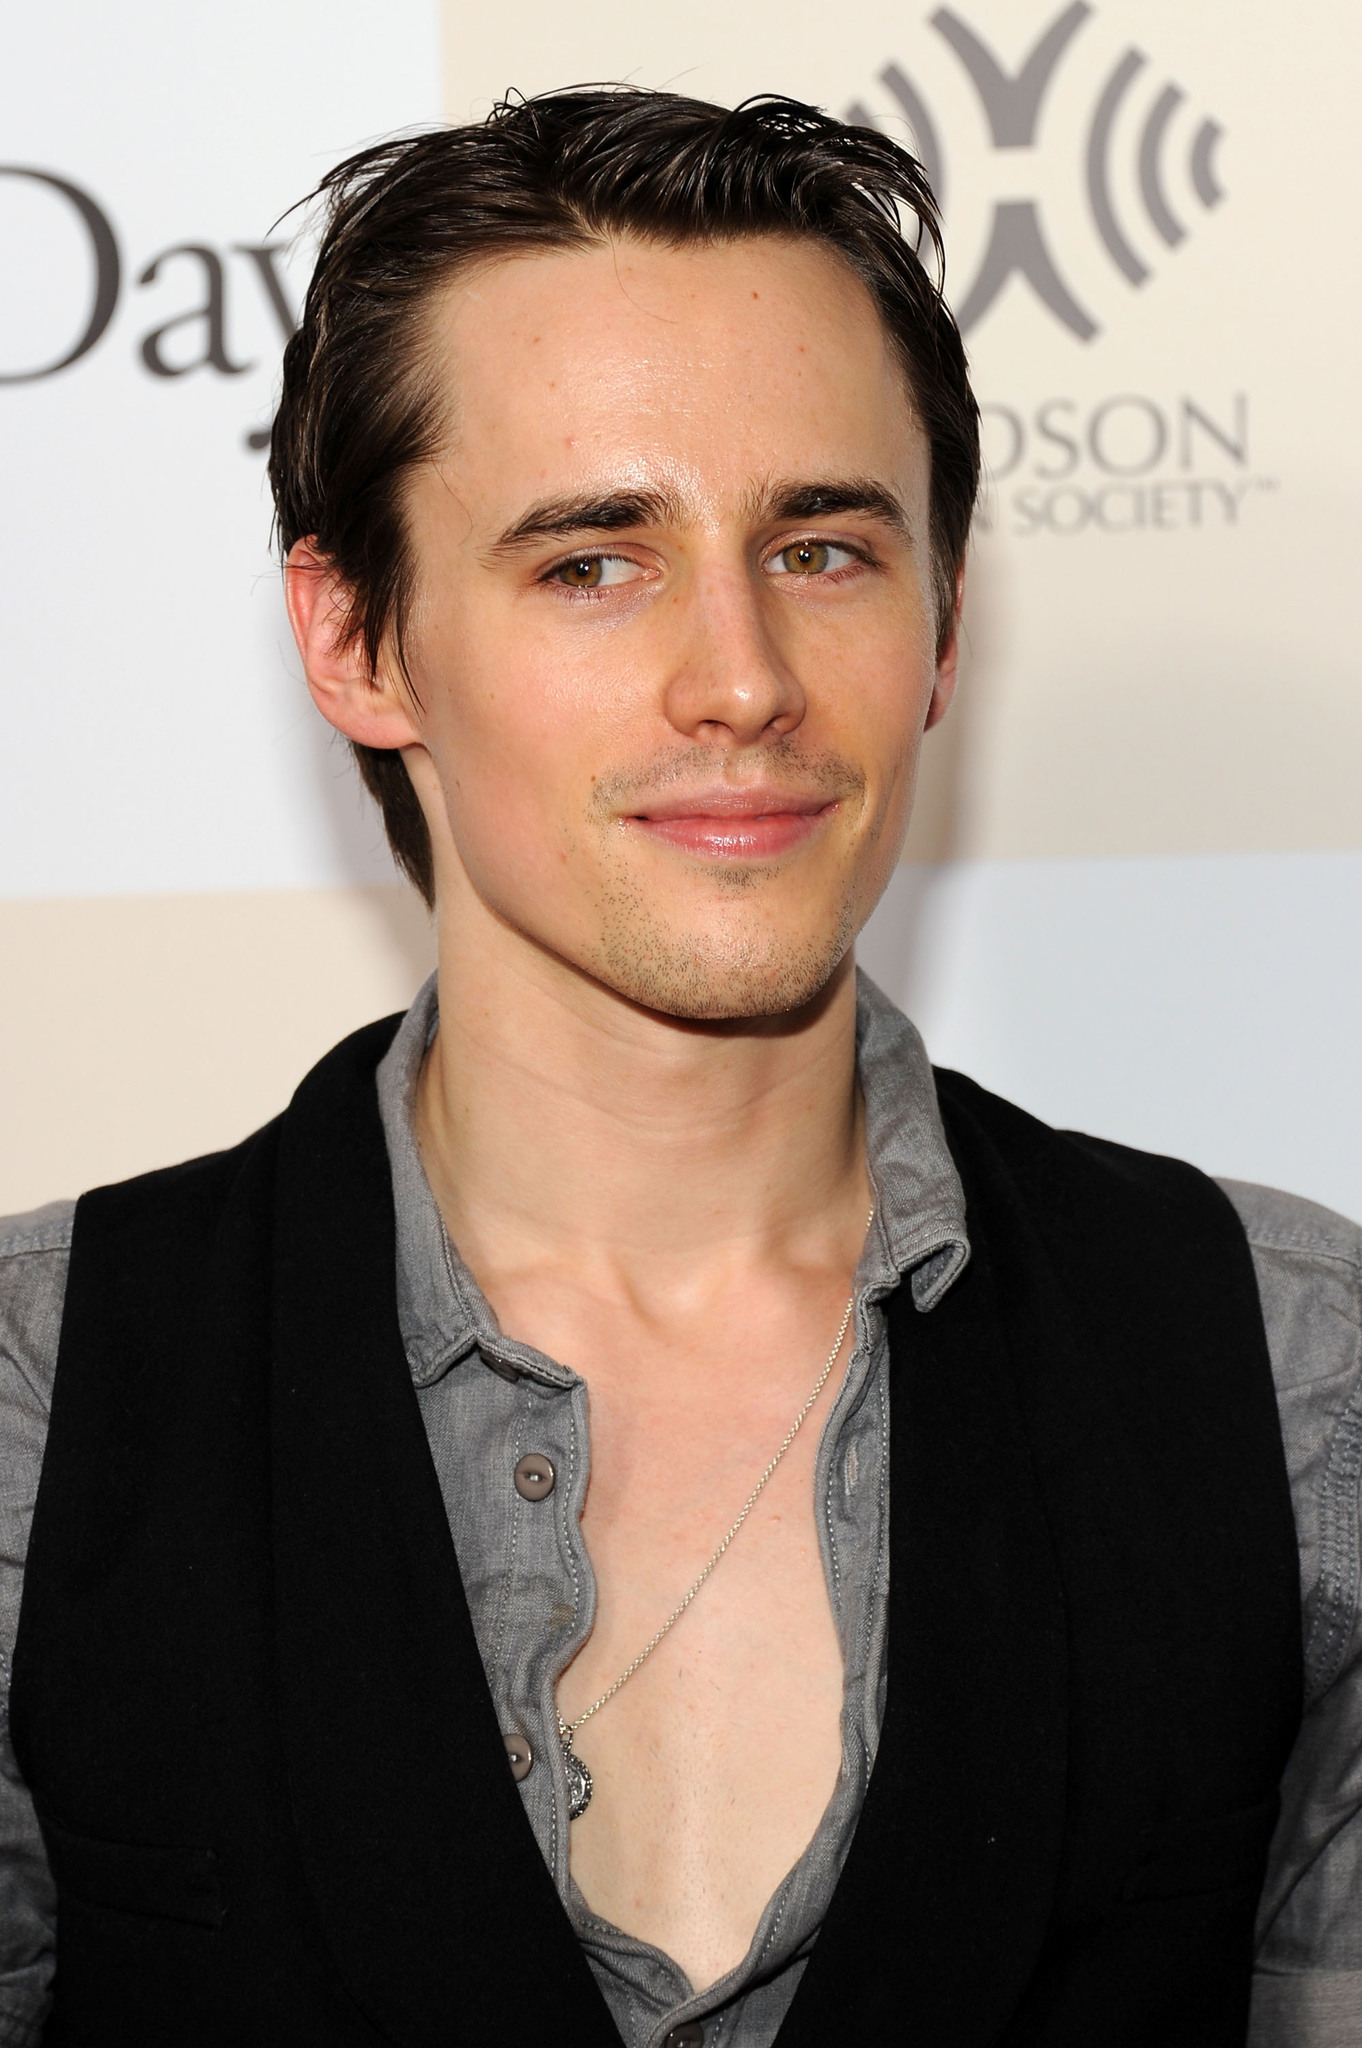 Reeve Carney at event of Viena diena (2011)